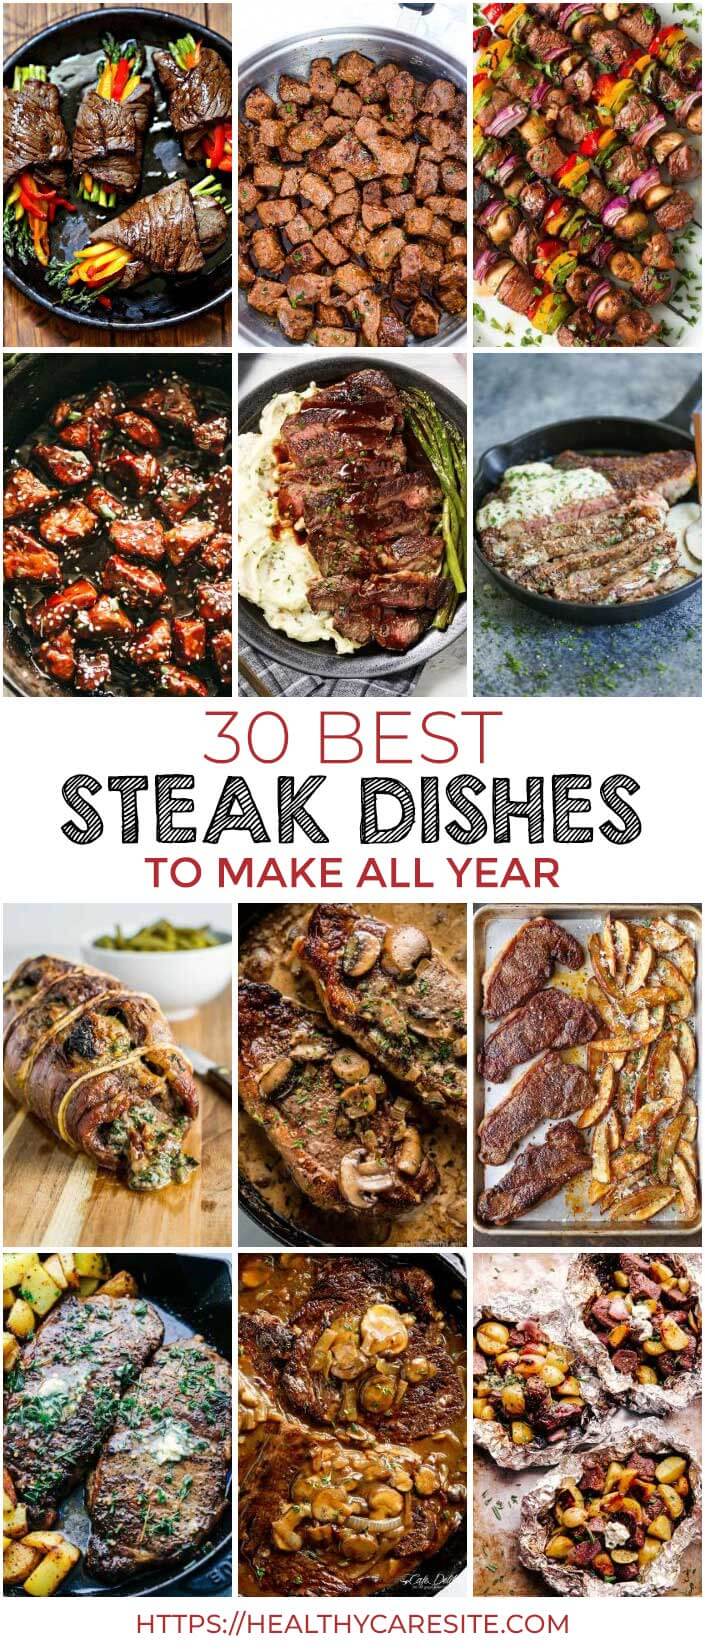 Here Are 30 Best Steak Dishes To Make All Year